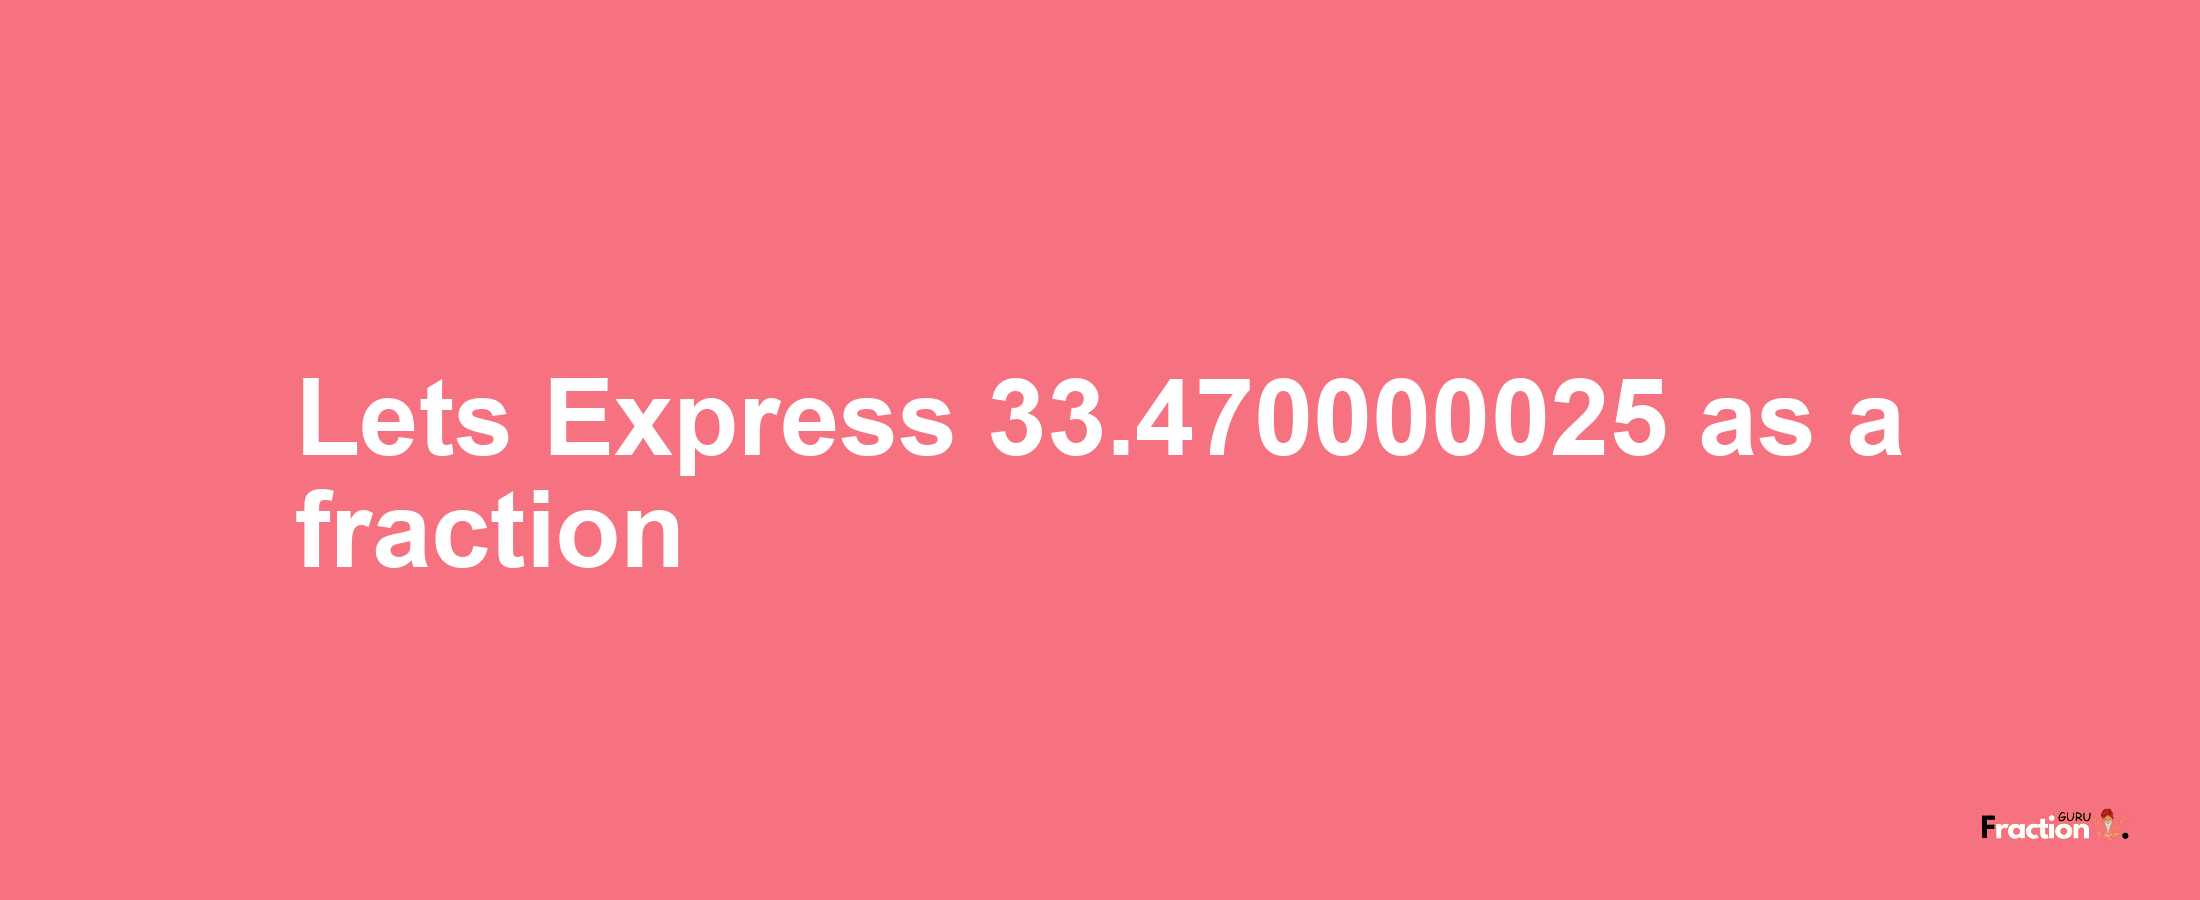 Lets Express 33.470000025 as afraction